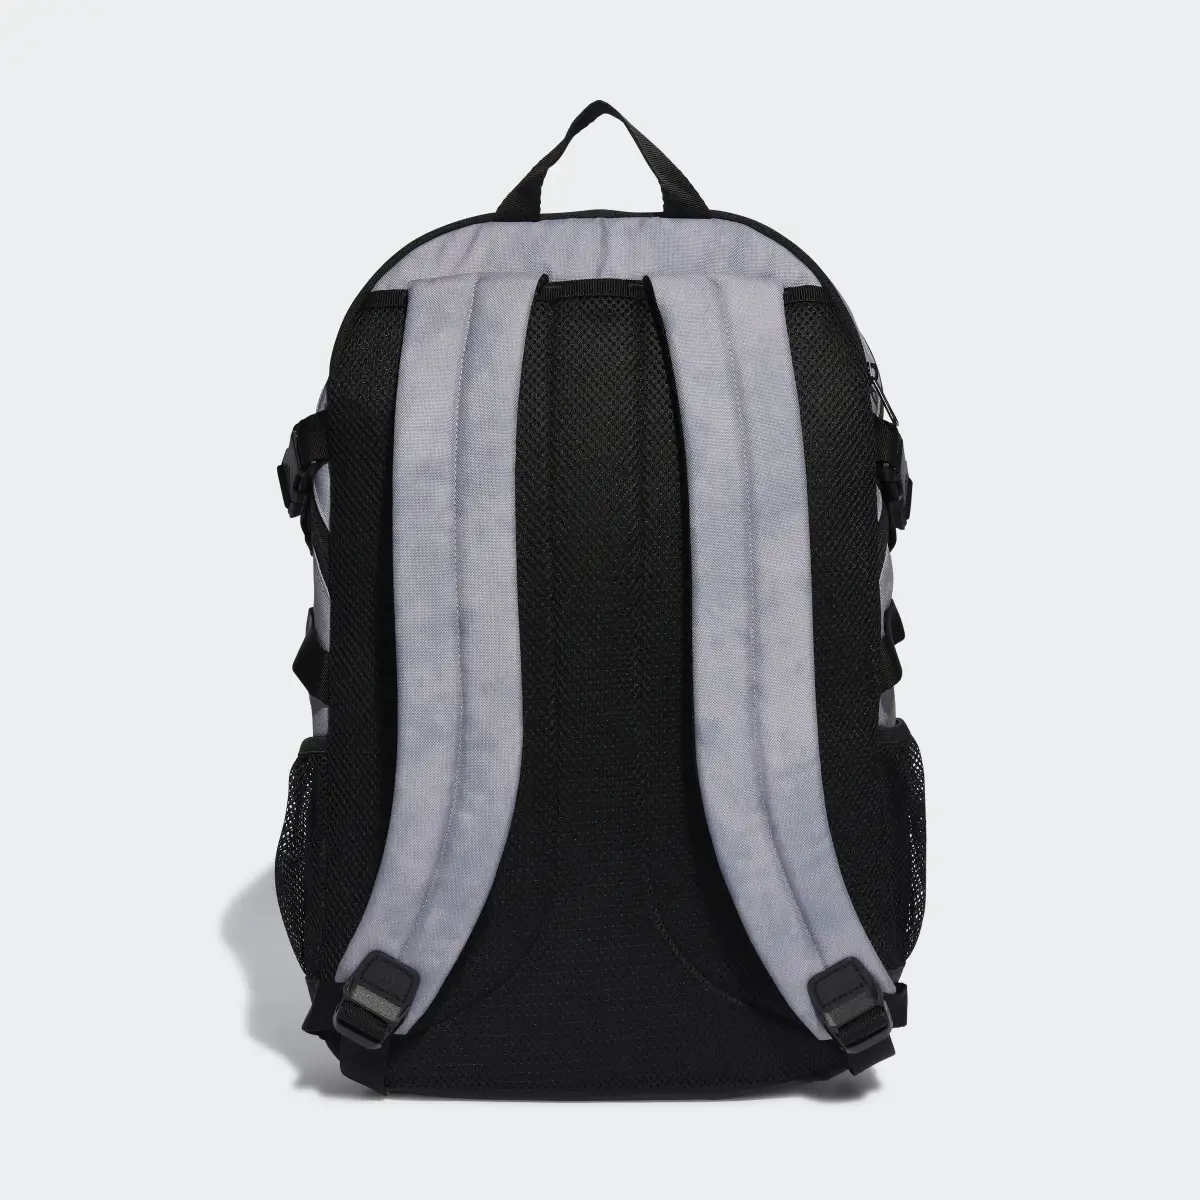 Adidas Power VI Graphic Backpack. 3